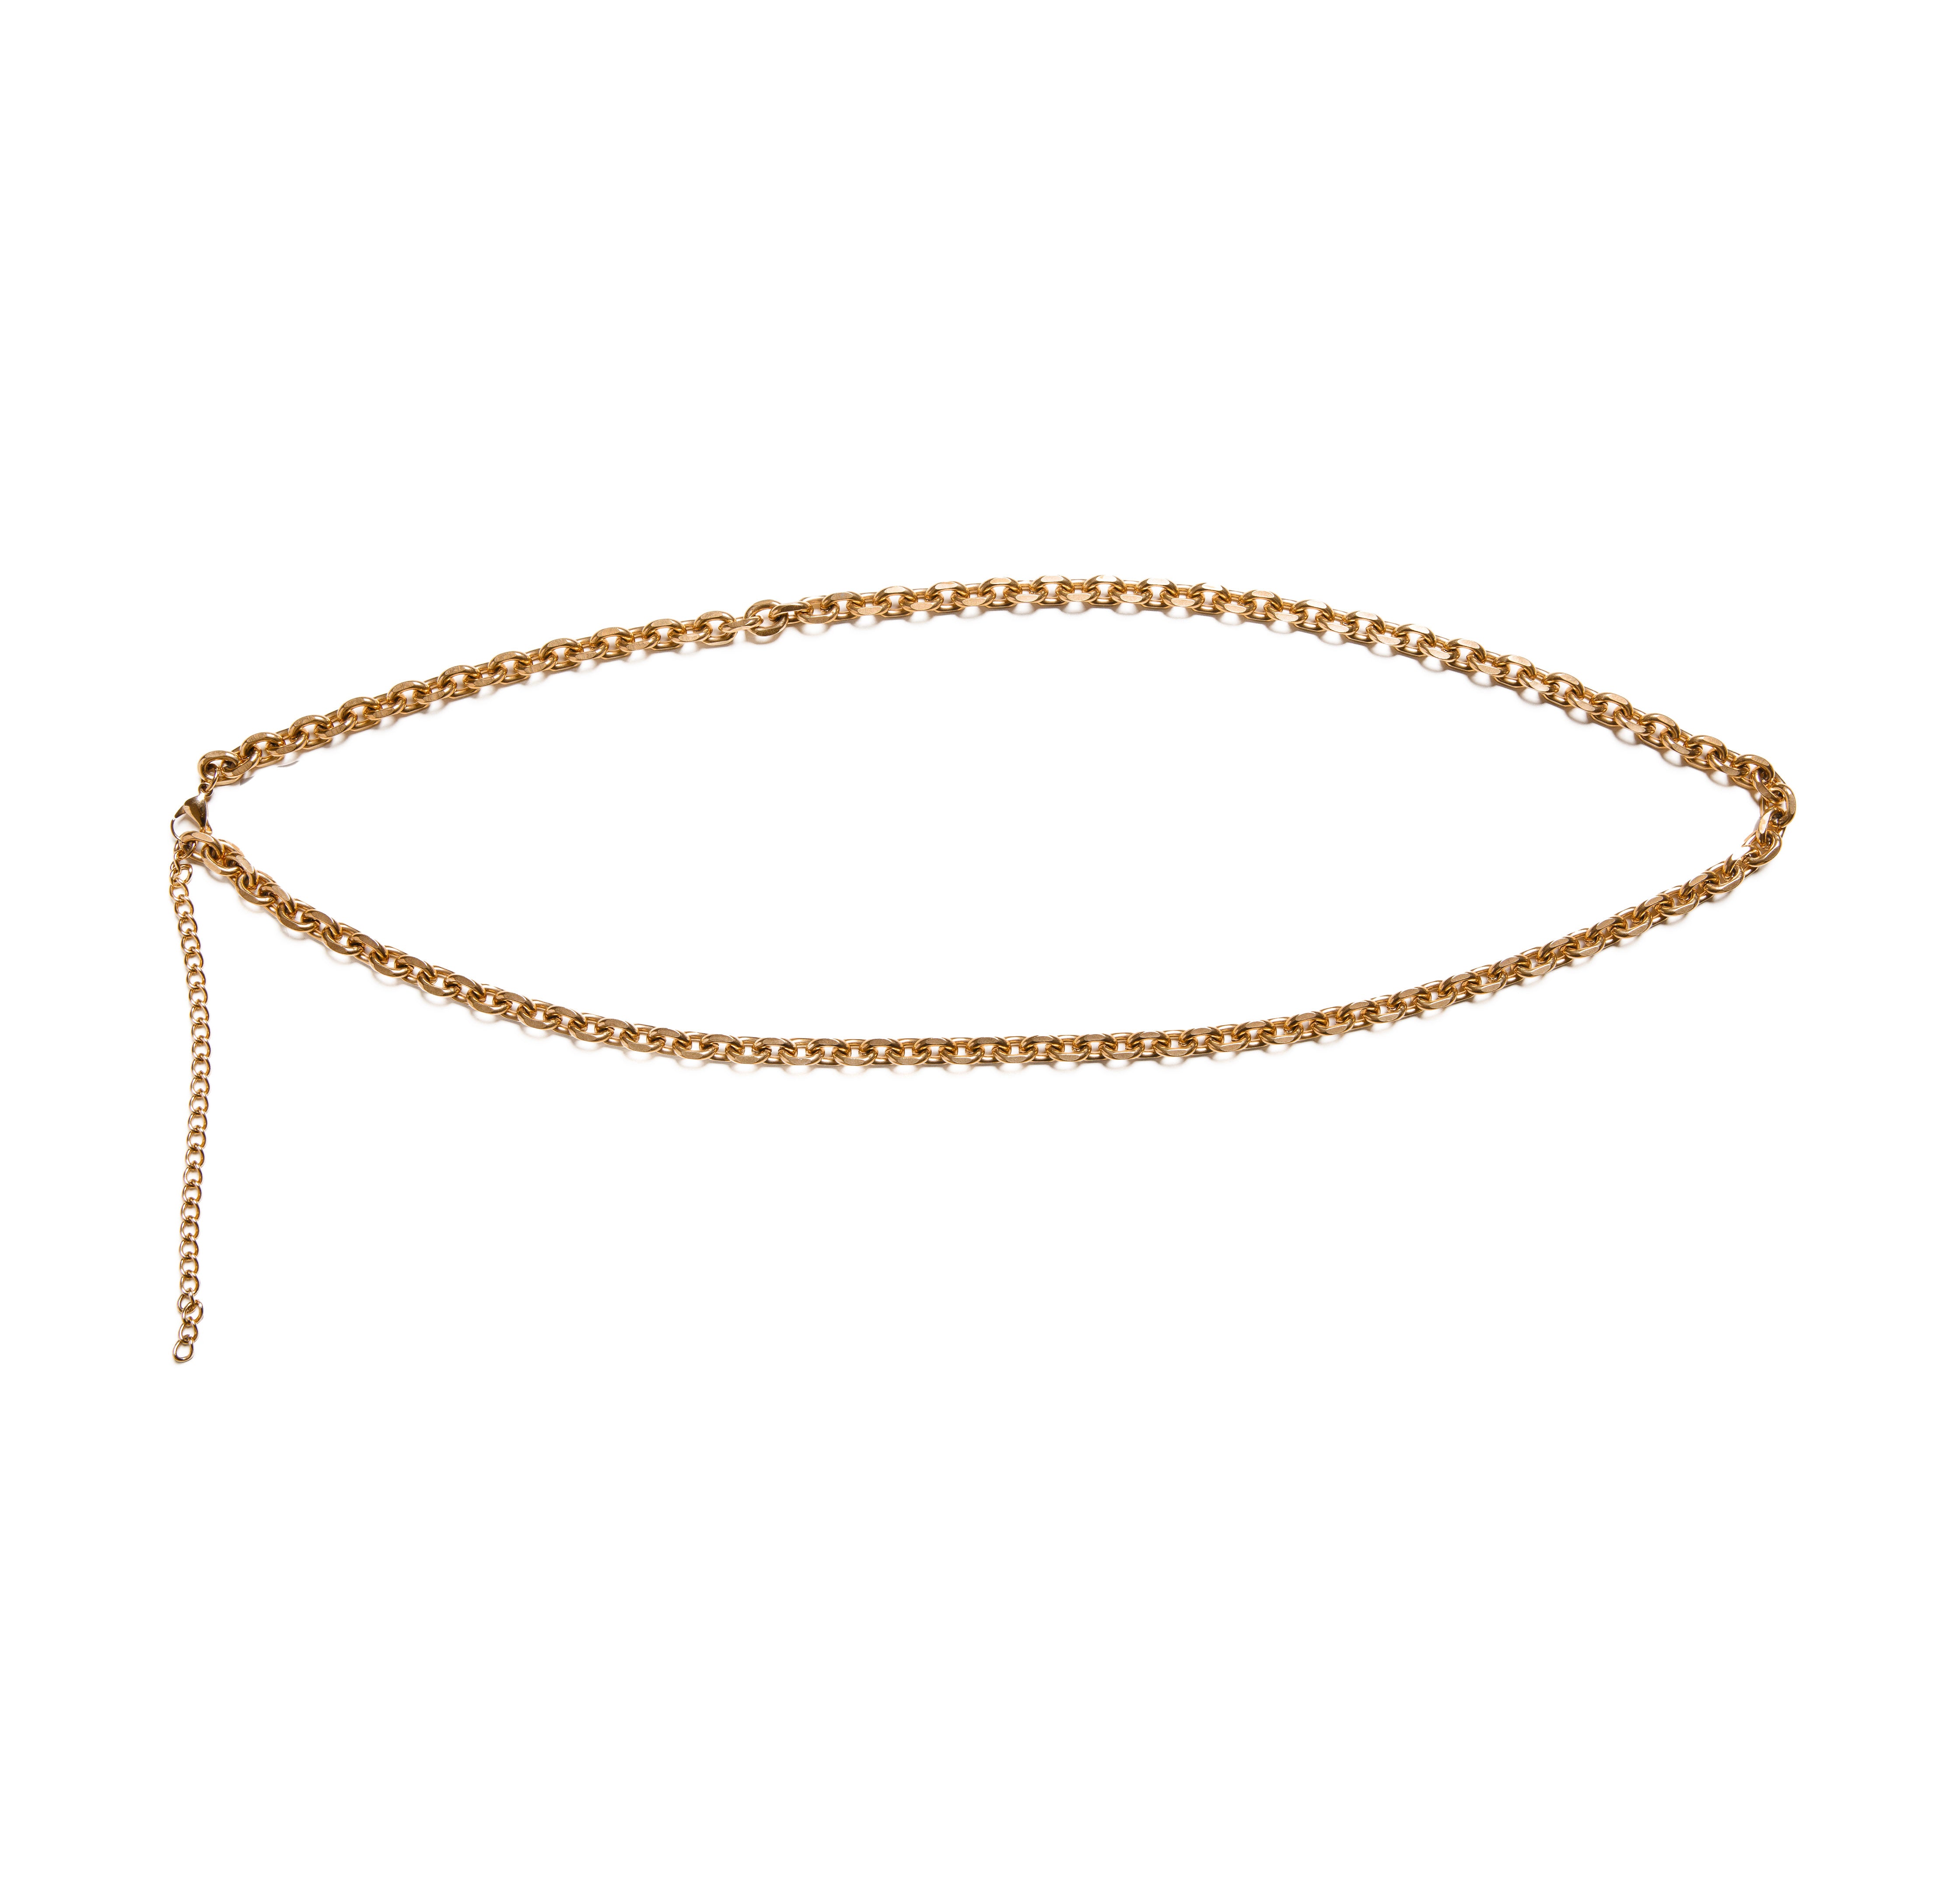 Merci beaucoup! We love our newest body chain accessory. Our chunky MERCI BELT CHAIN can be looped through belt loops on jeans, worn over a dress, skirts, trousers, the possibilities are endless. Make a statement in this versatile piece.  18K gold plated on stainless steel. Length:41" Extender: 6"  It can be hooked anywhere in the links you can adjust the length as you like.